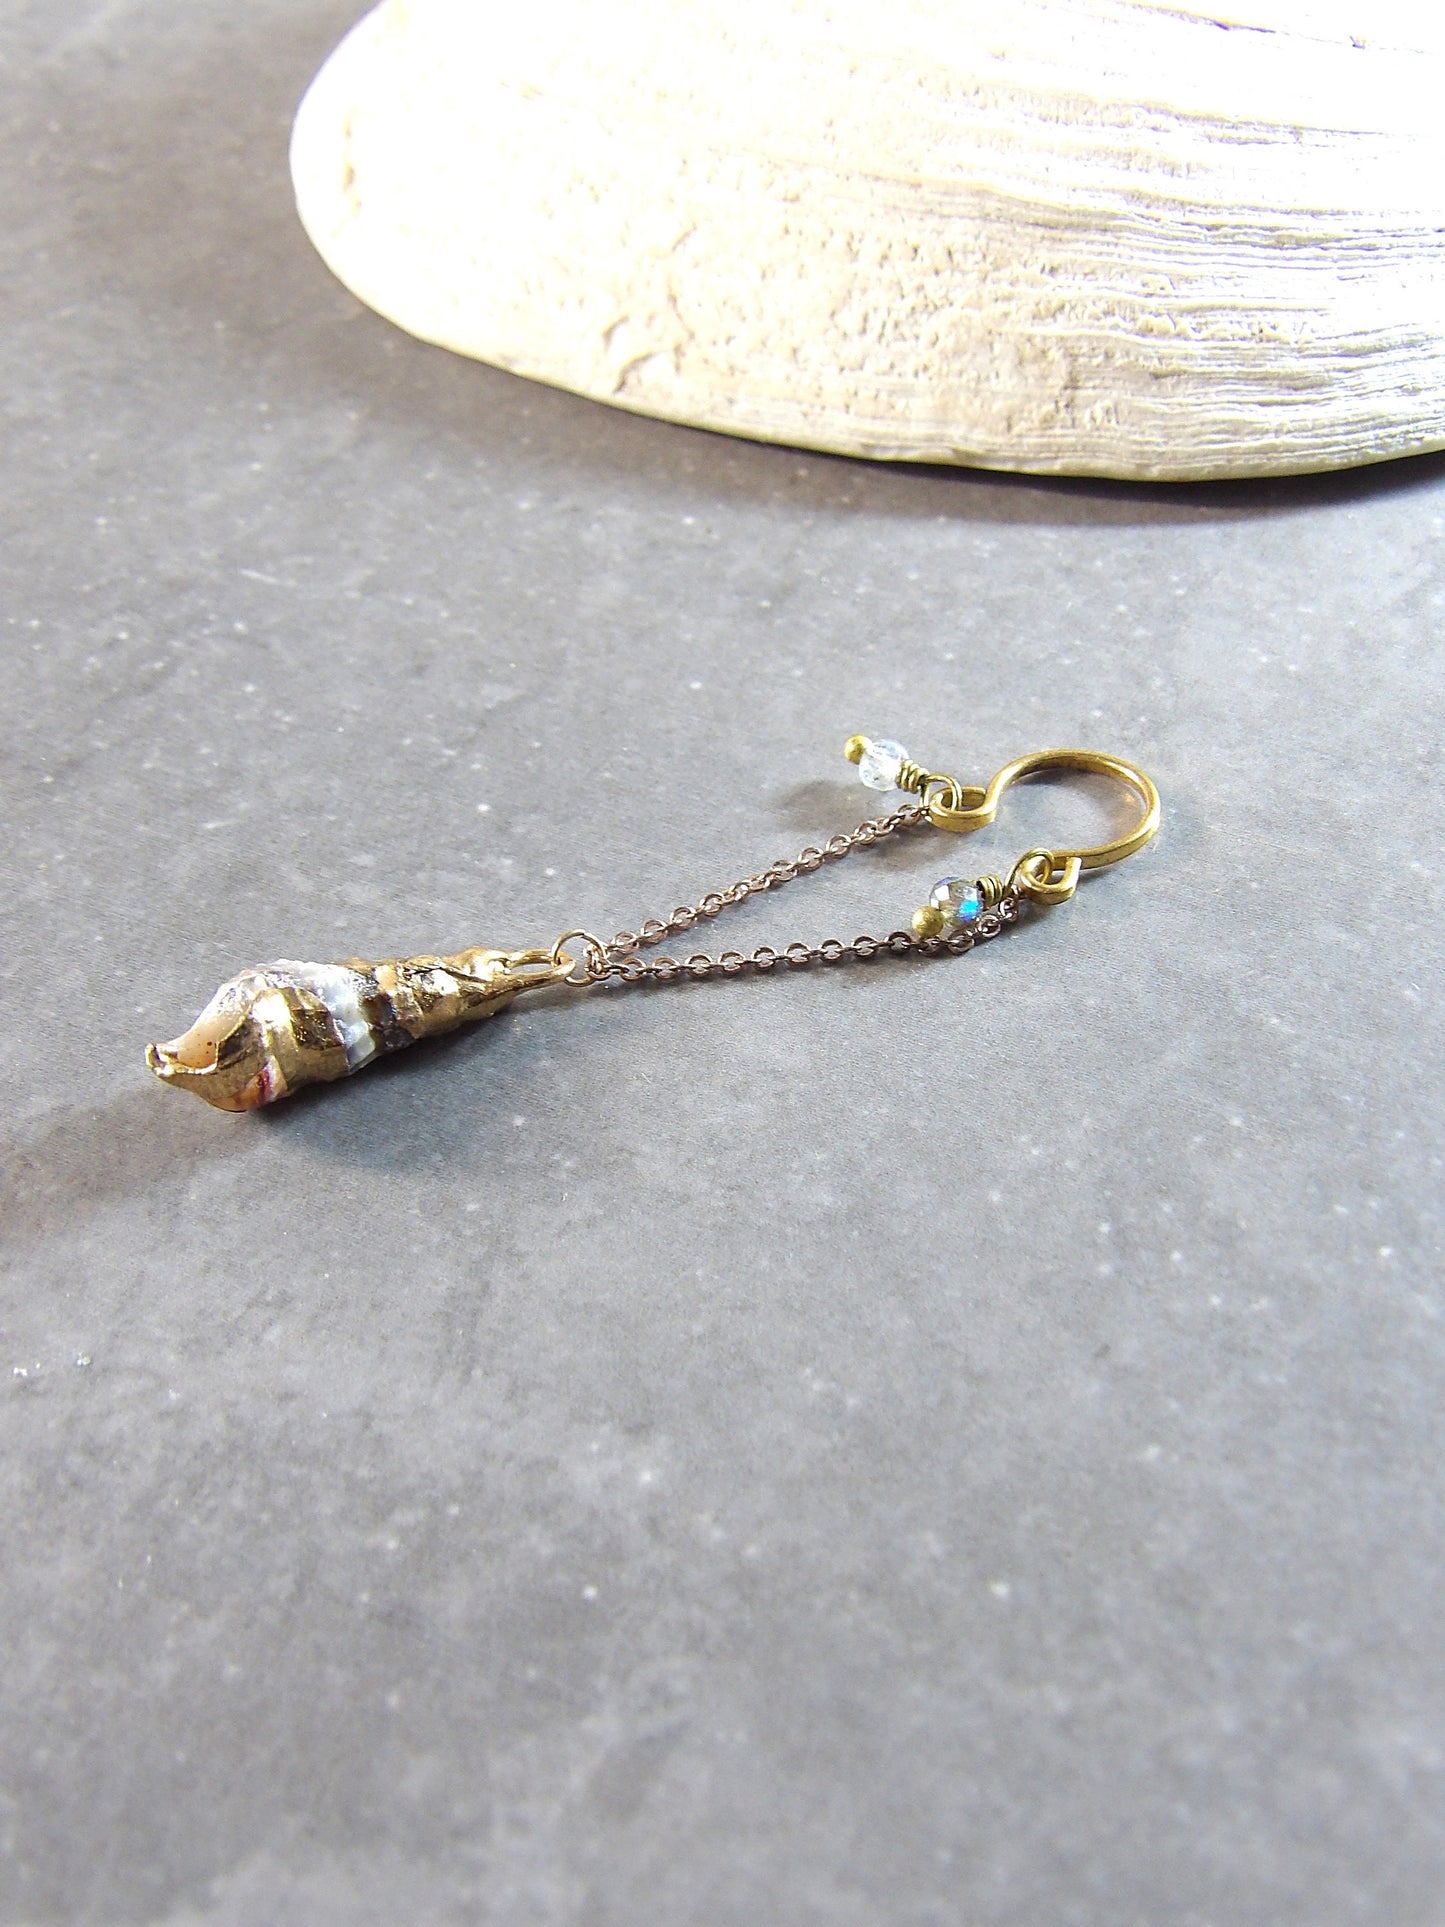 Ear Cuff No Piercing With Labradorite & Seashell | Earcuff No Piercing With Chain | Ethical Jewelry | Boho Siren Jewelry | Meaningful Gifts